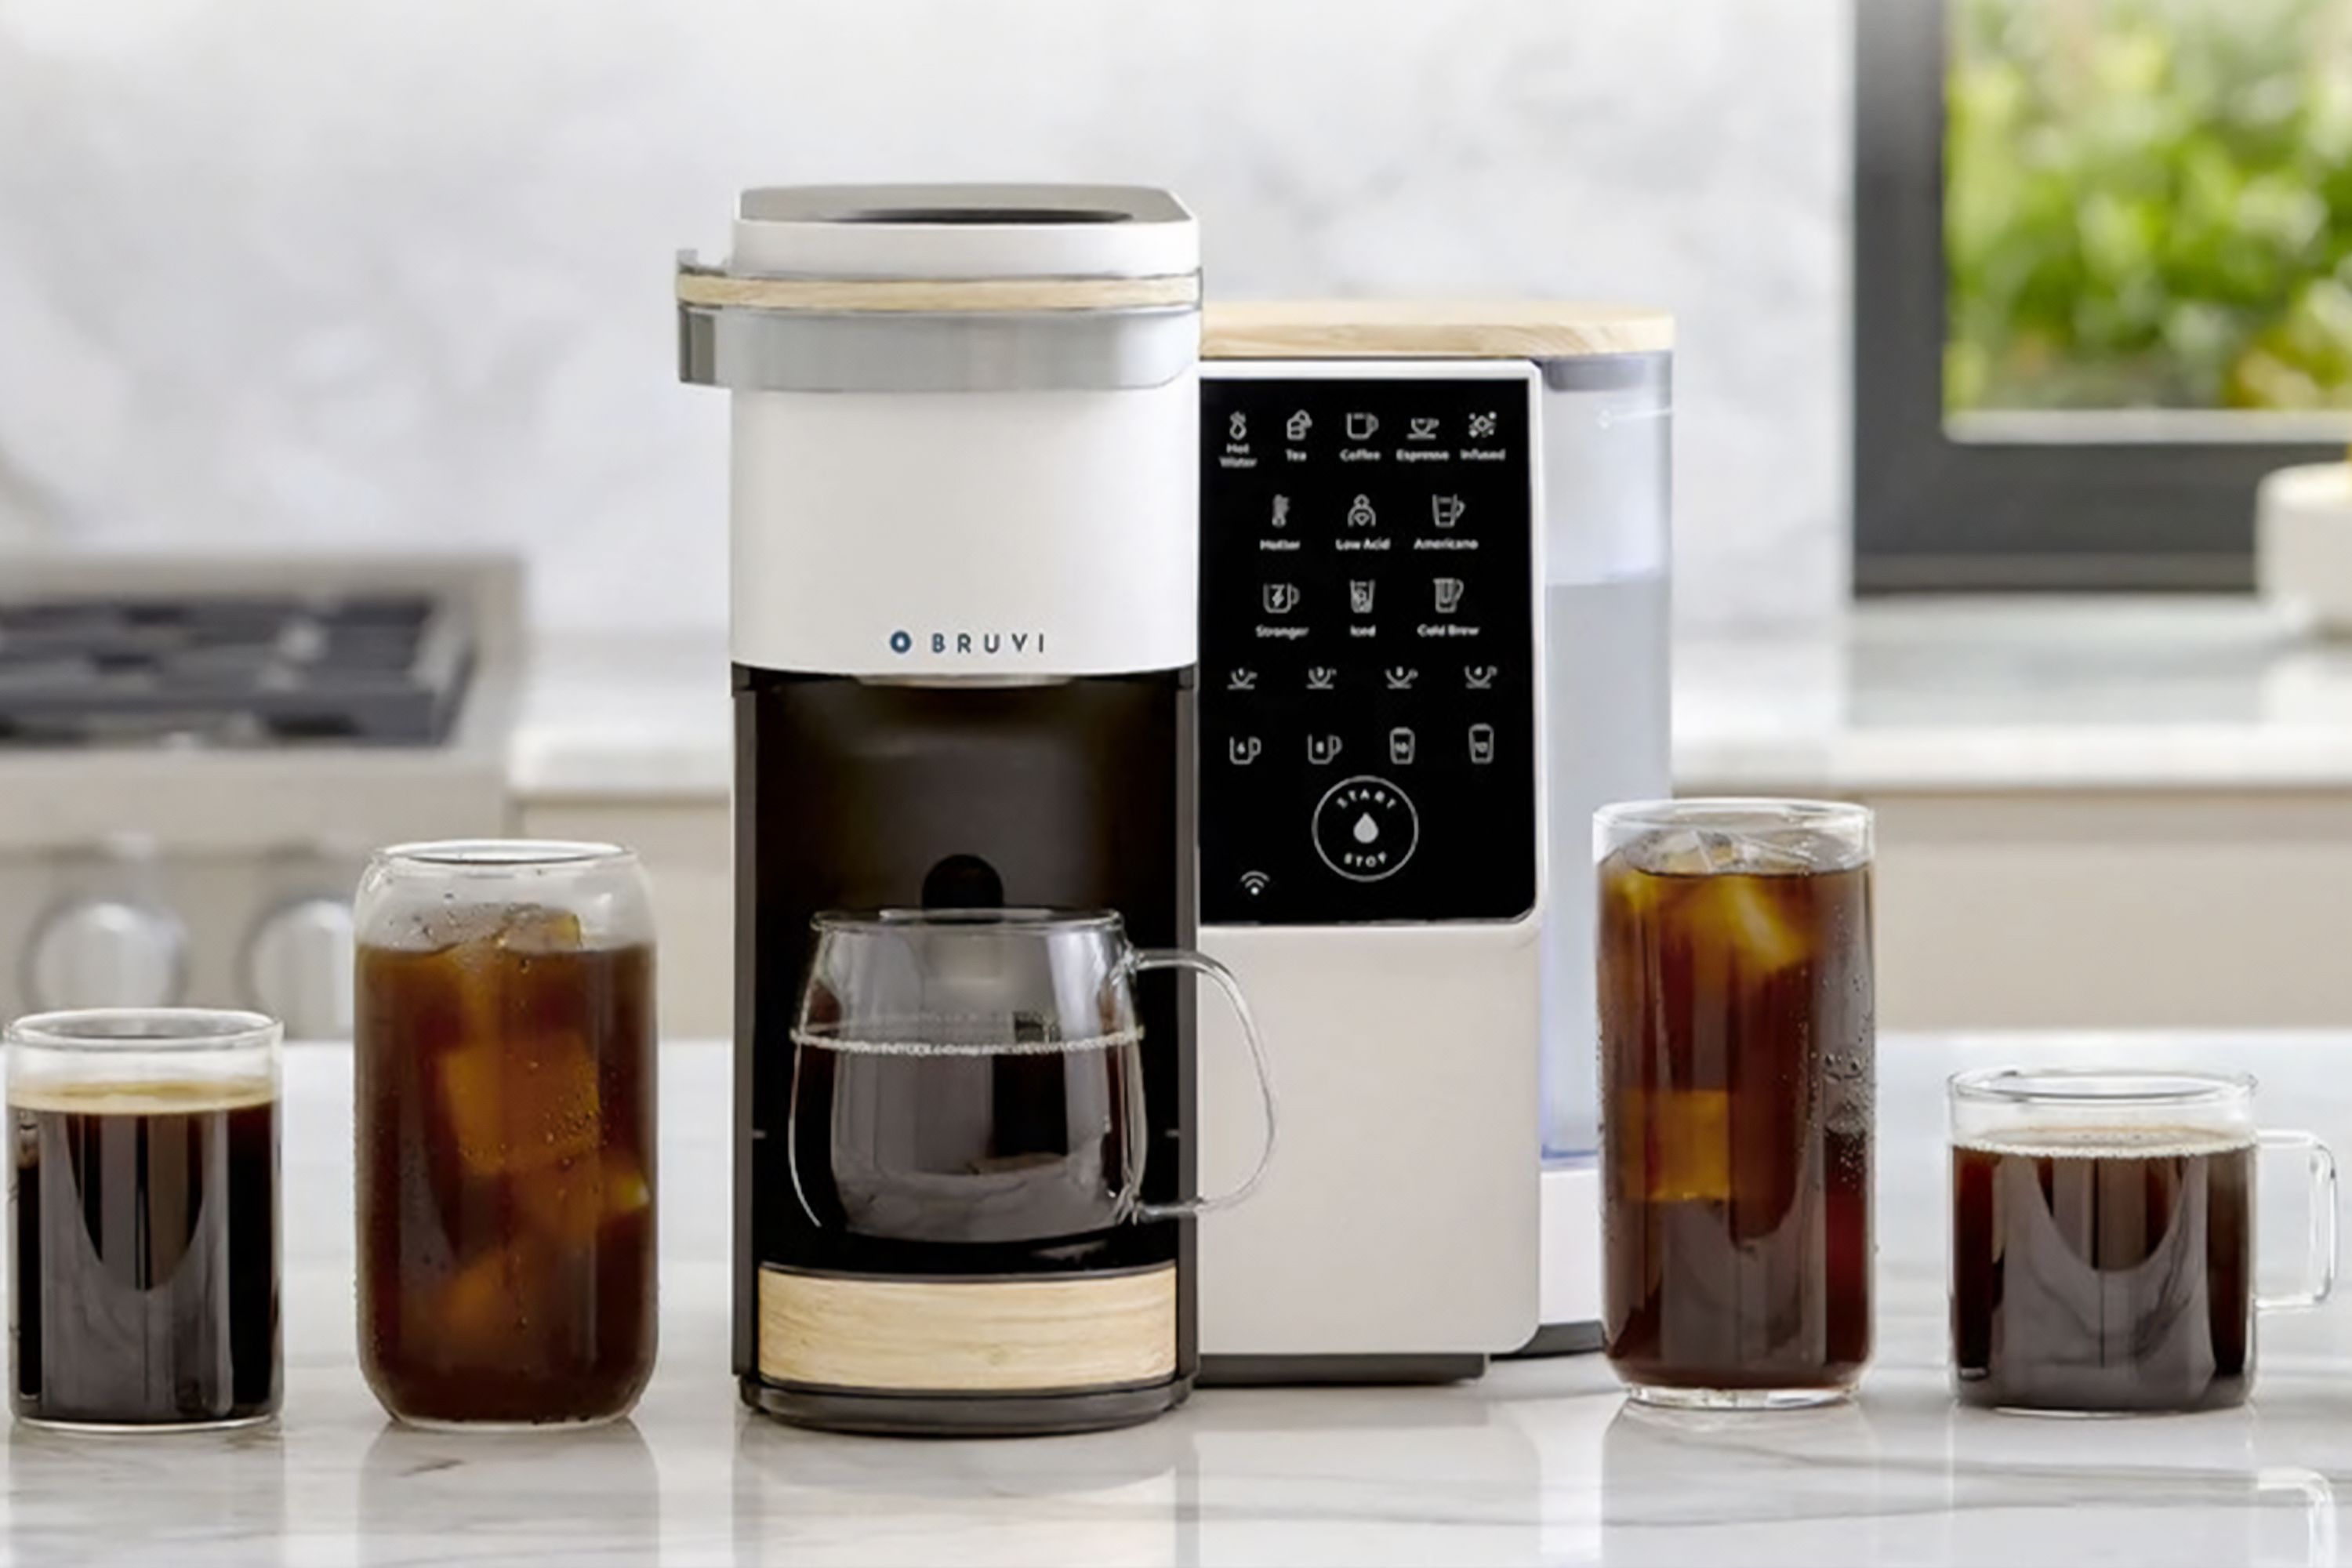 Instant Dual Pod Plus Coffee Maker Review: K-Cups and Nespresso